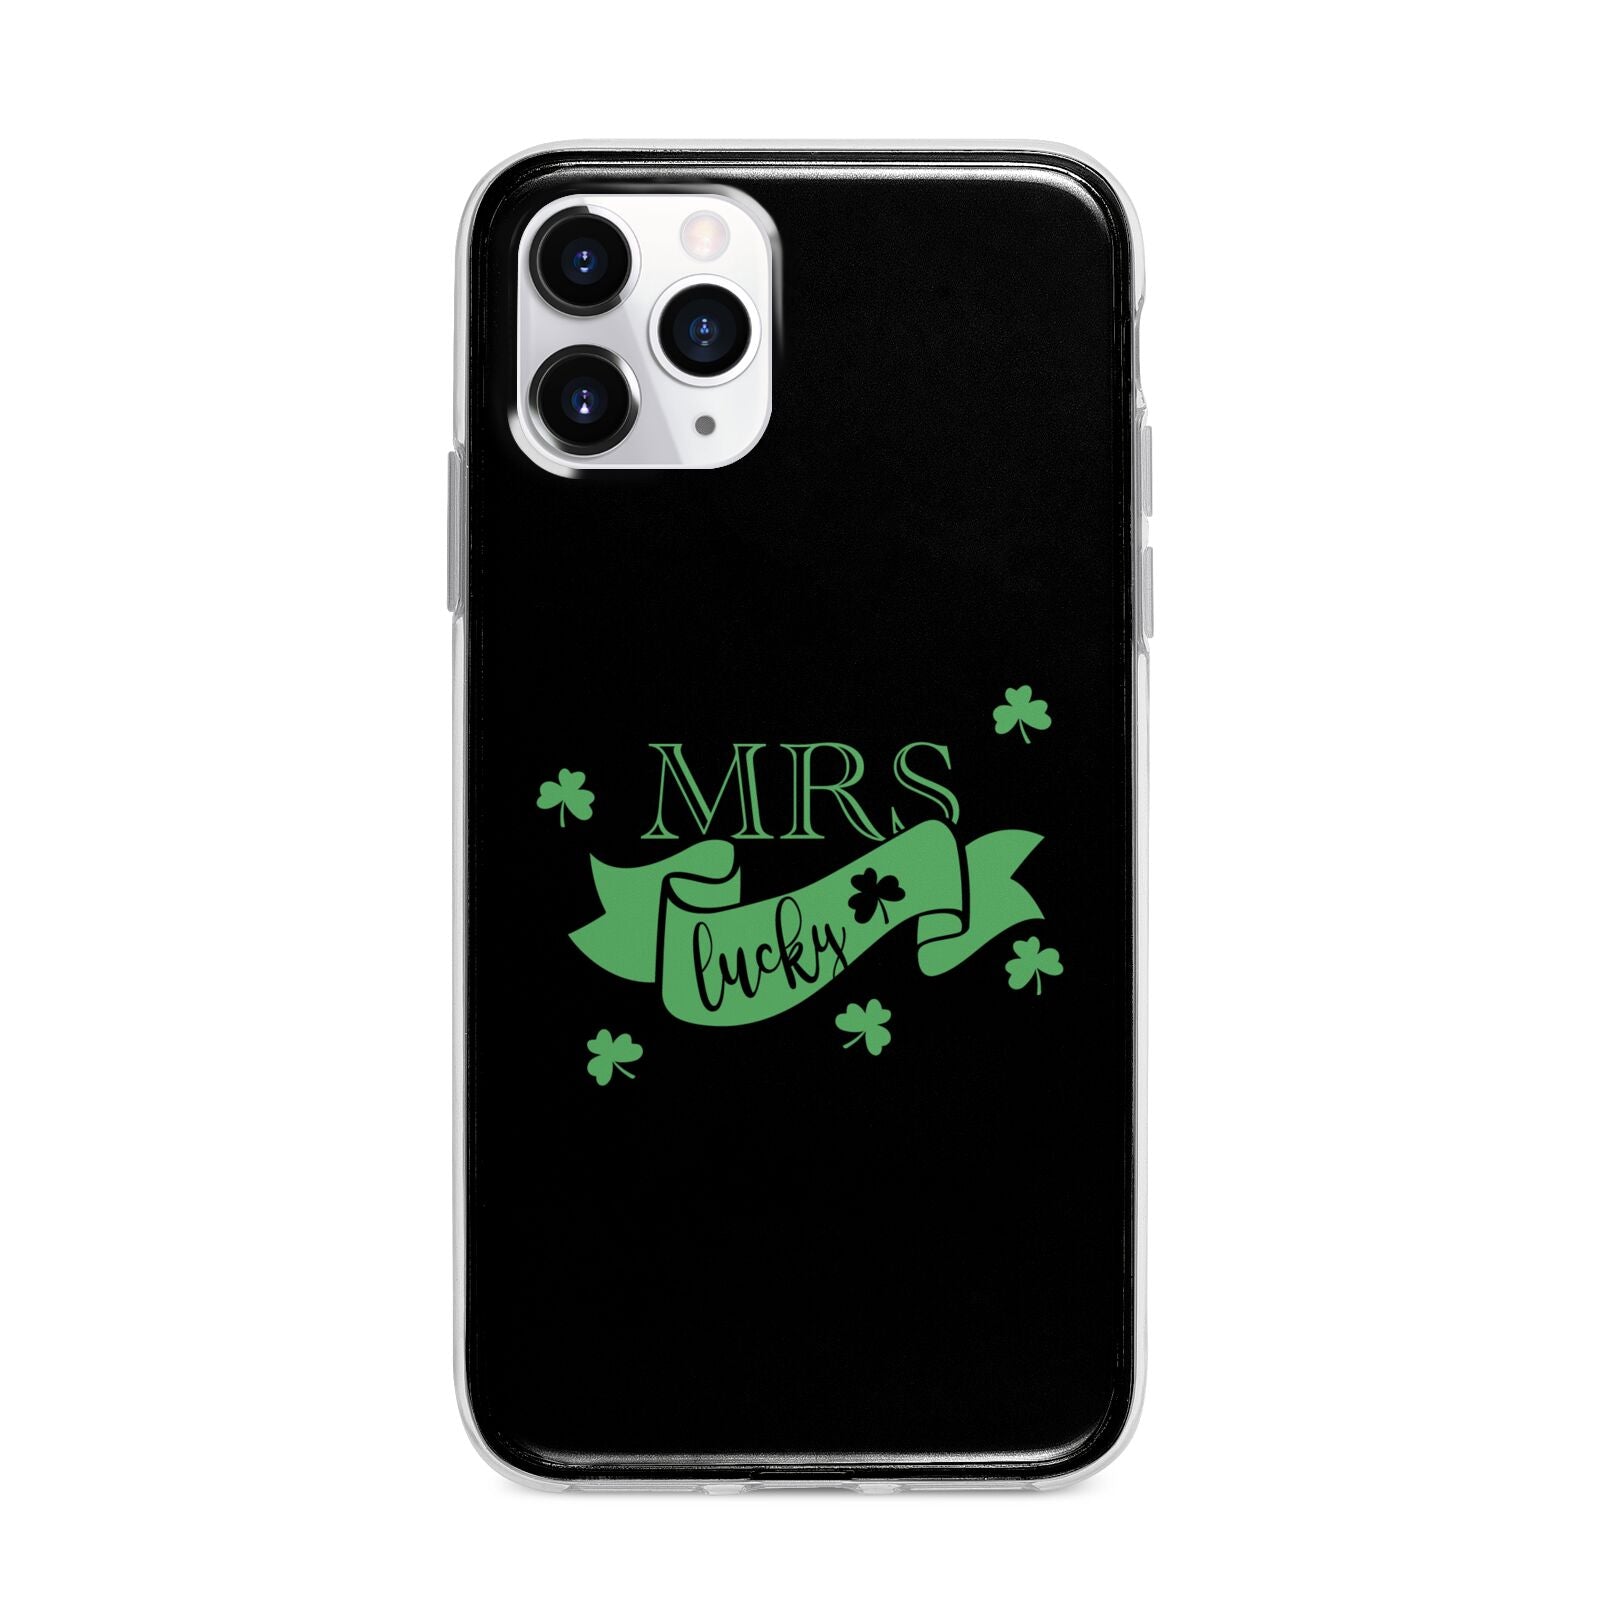 Mrs Lucky Apple iPhone 11 Pro Max in Silver with Bumper Case